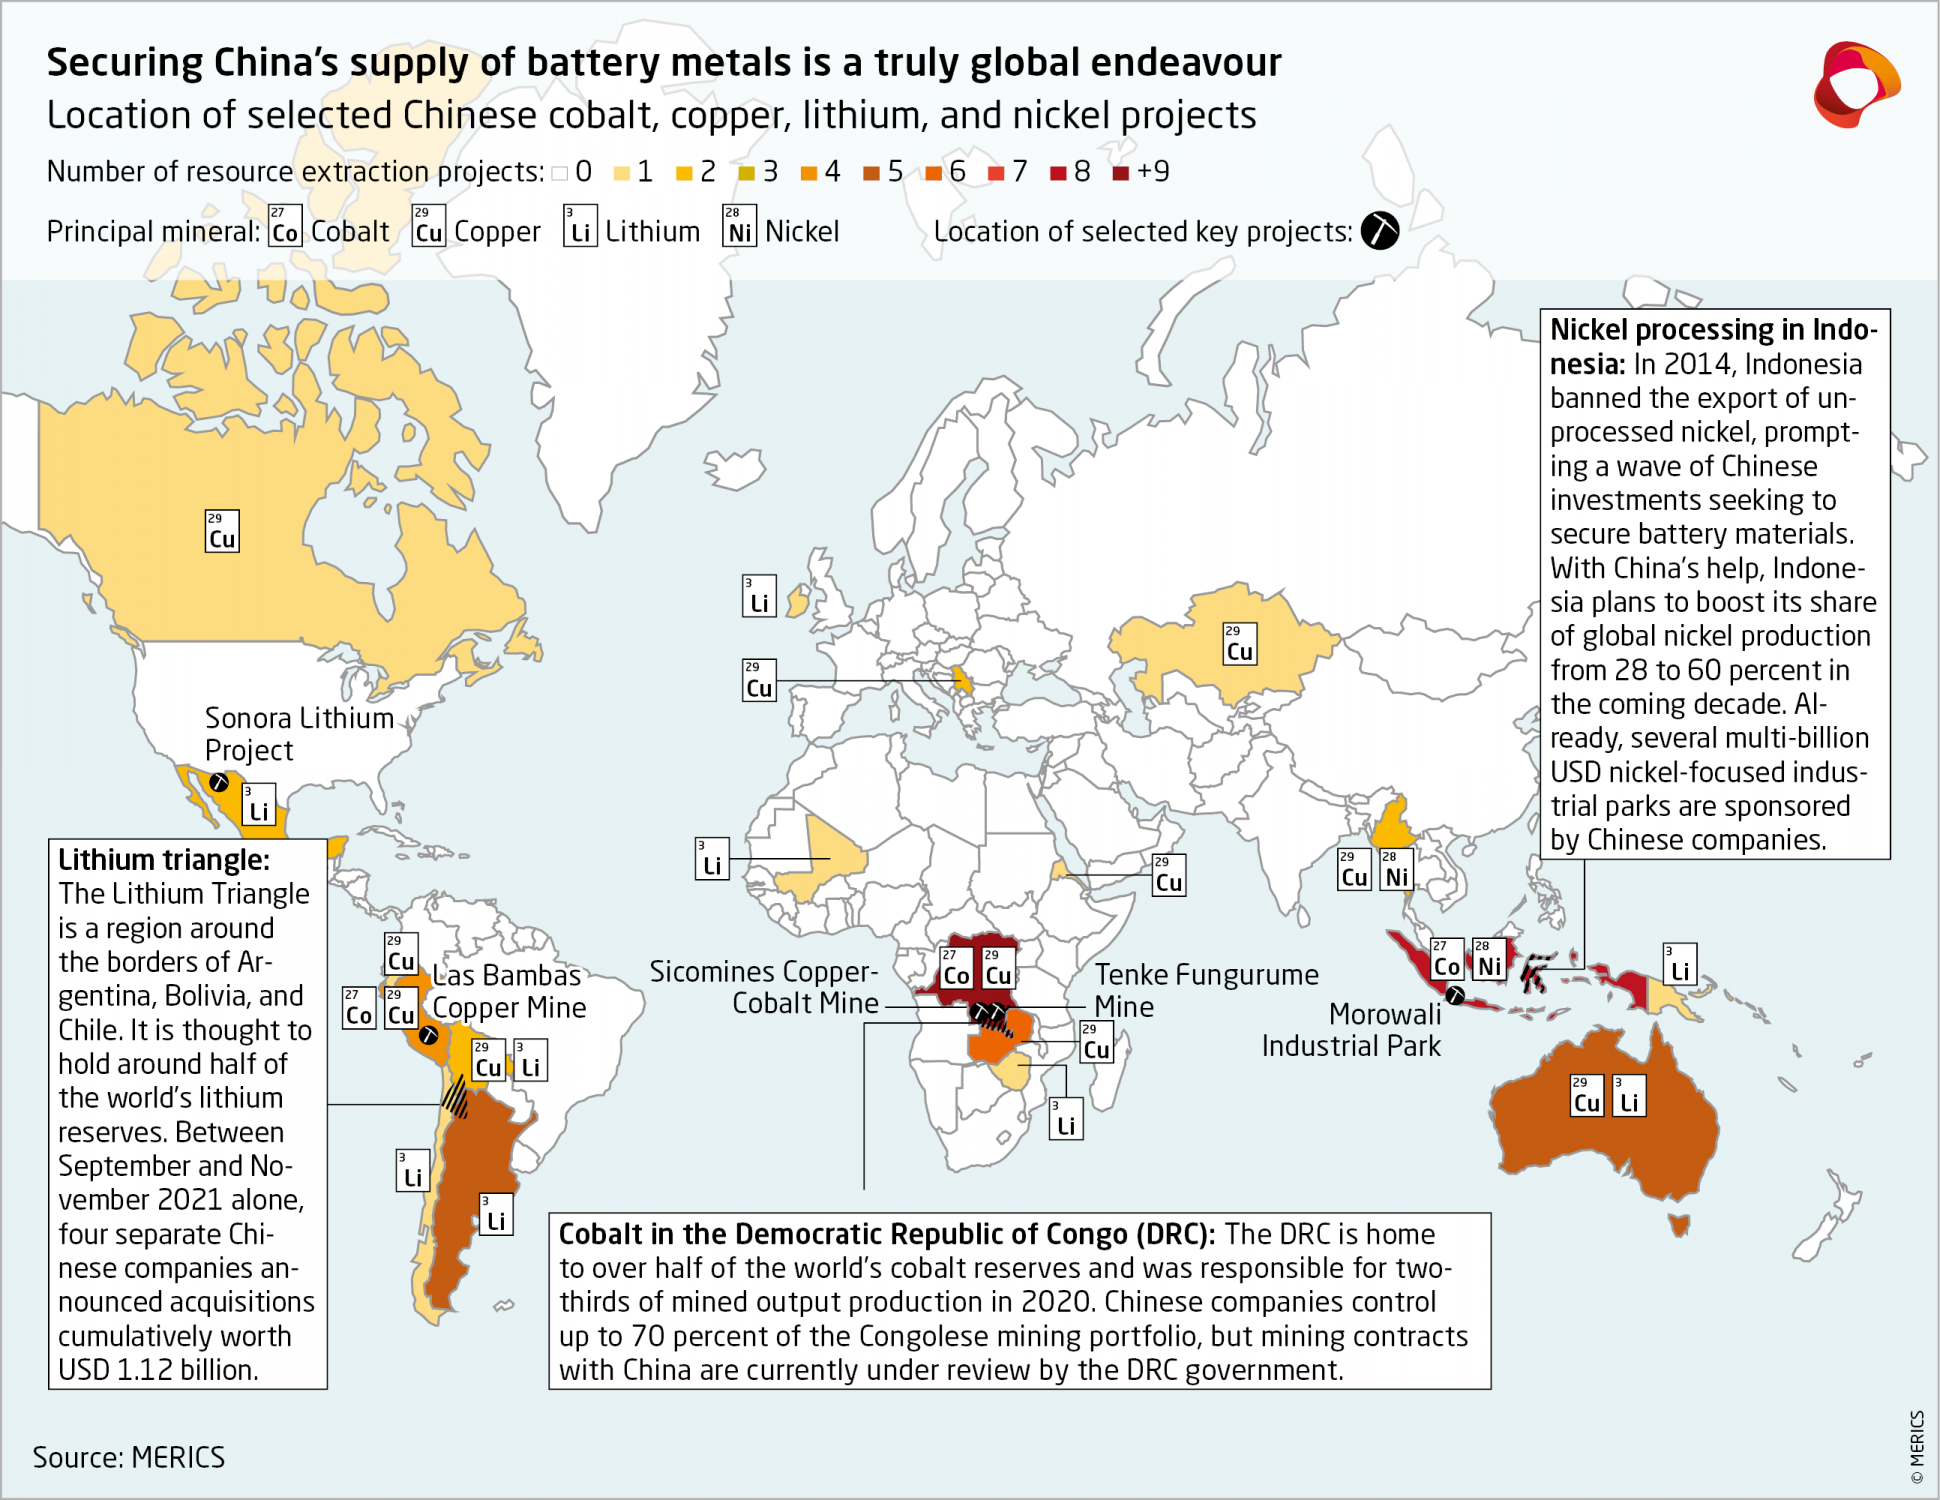 China secures battery metals globally